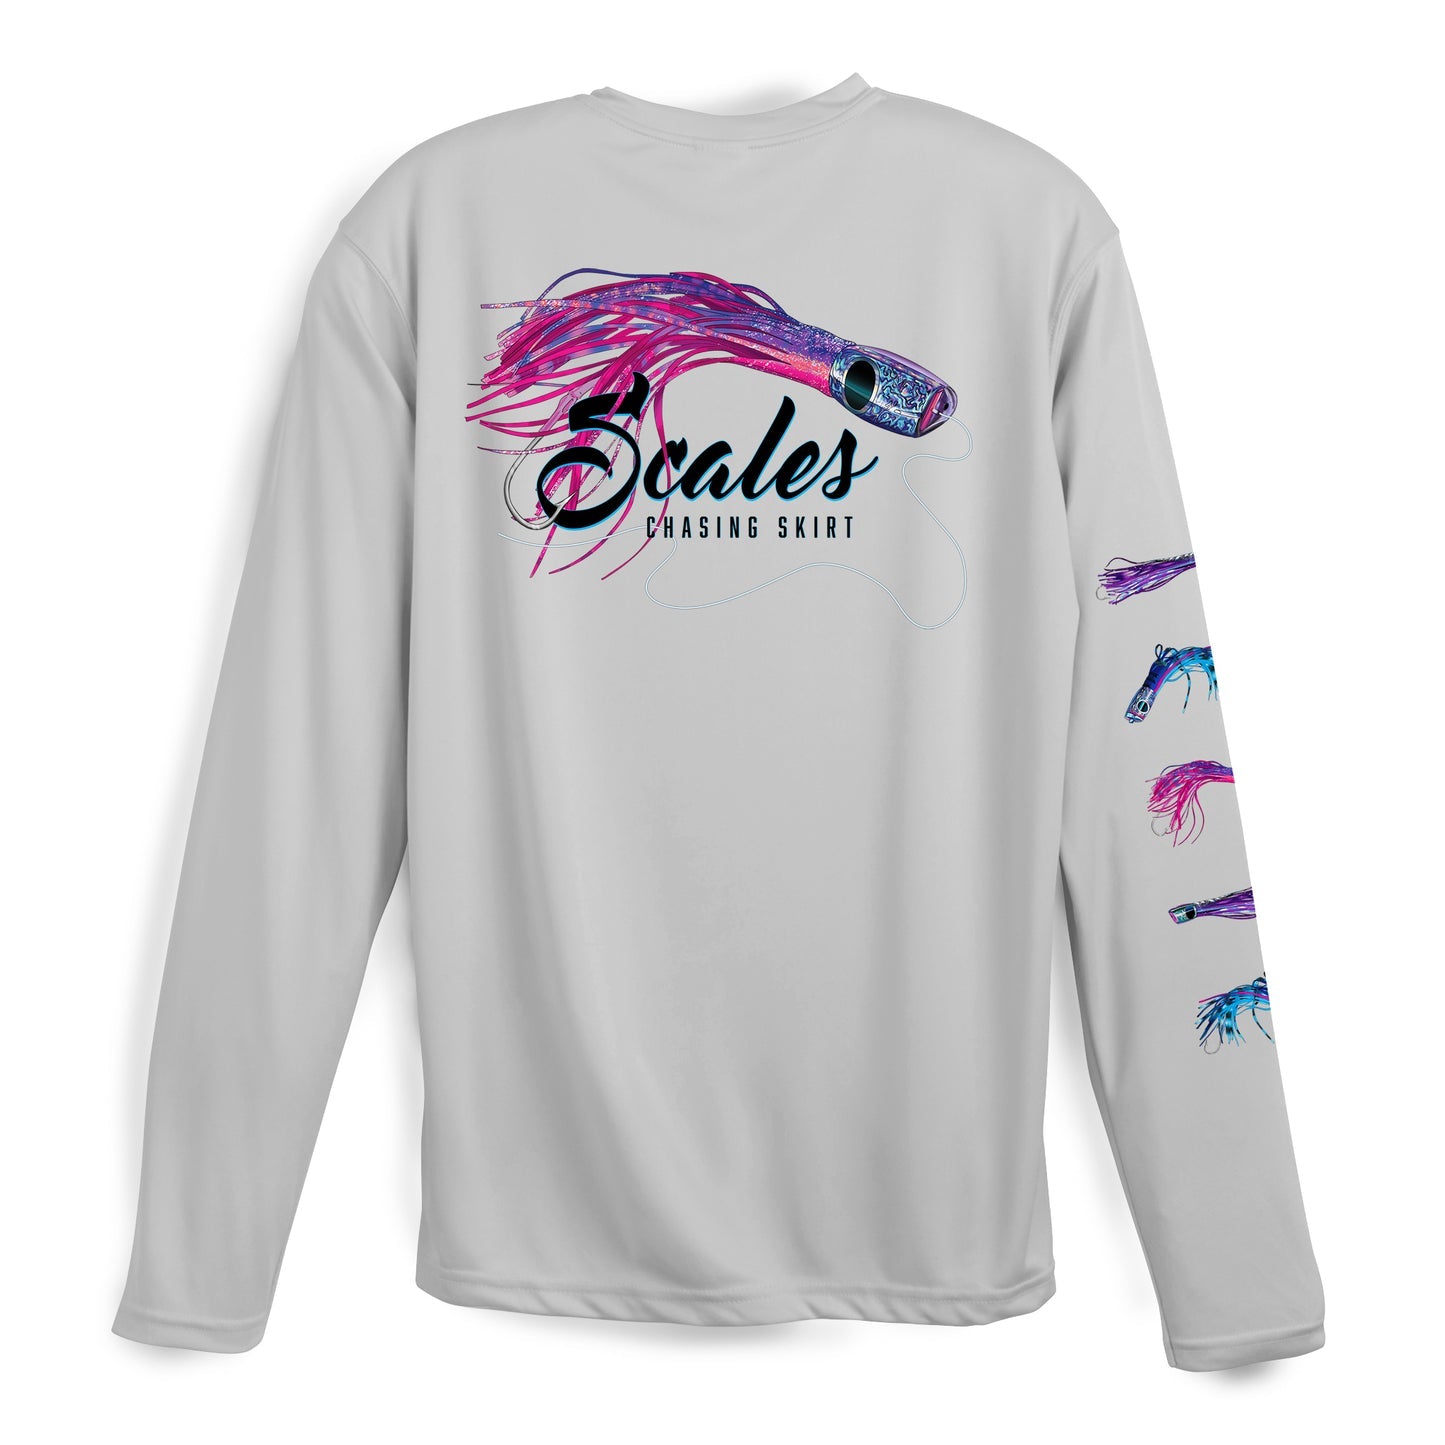 SCALES Chasing Skirts Long Sleeve Performance Shirt